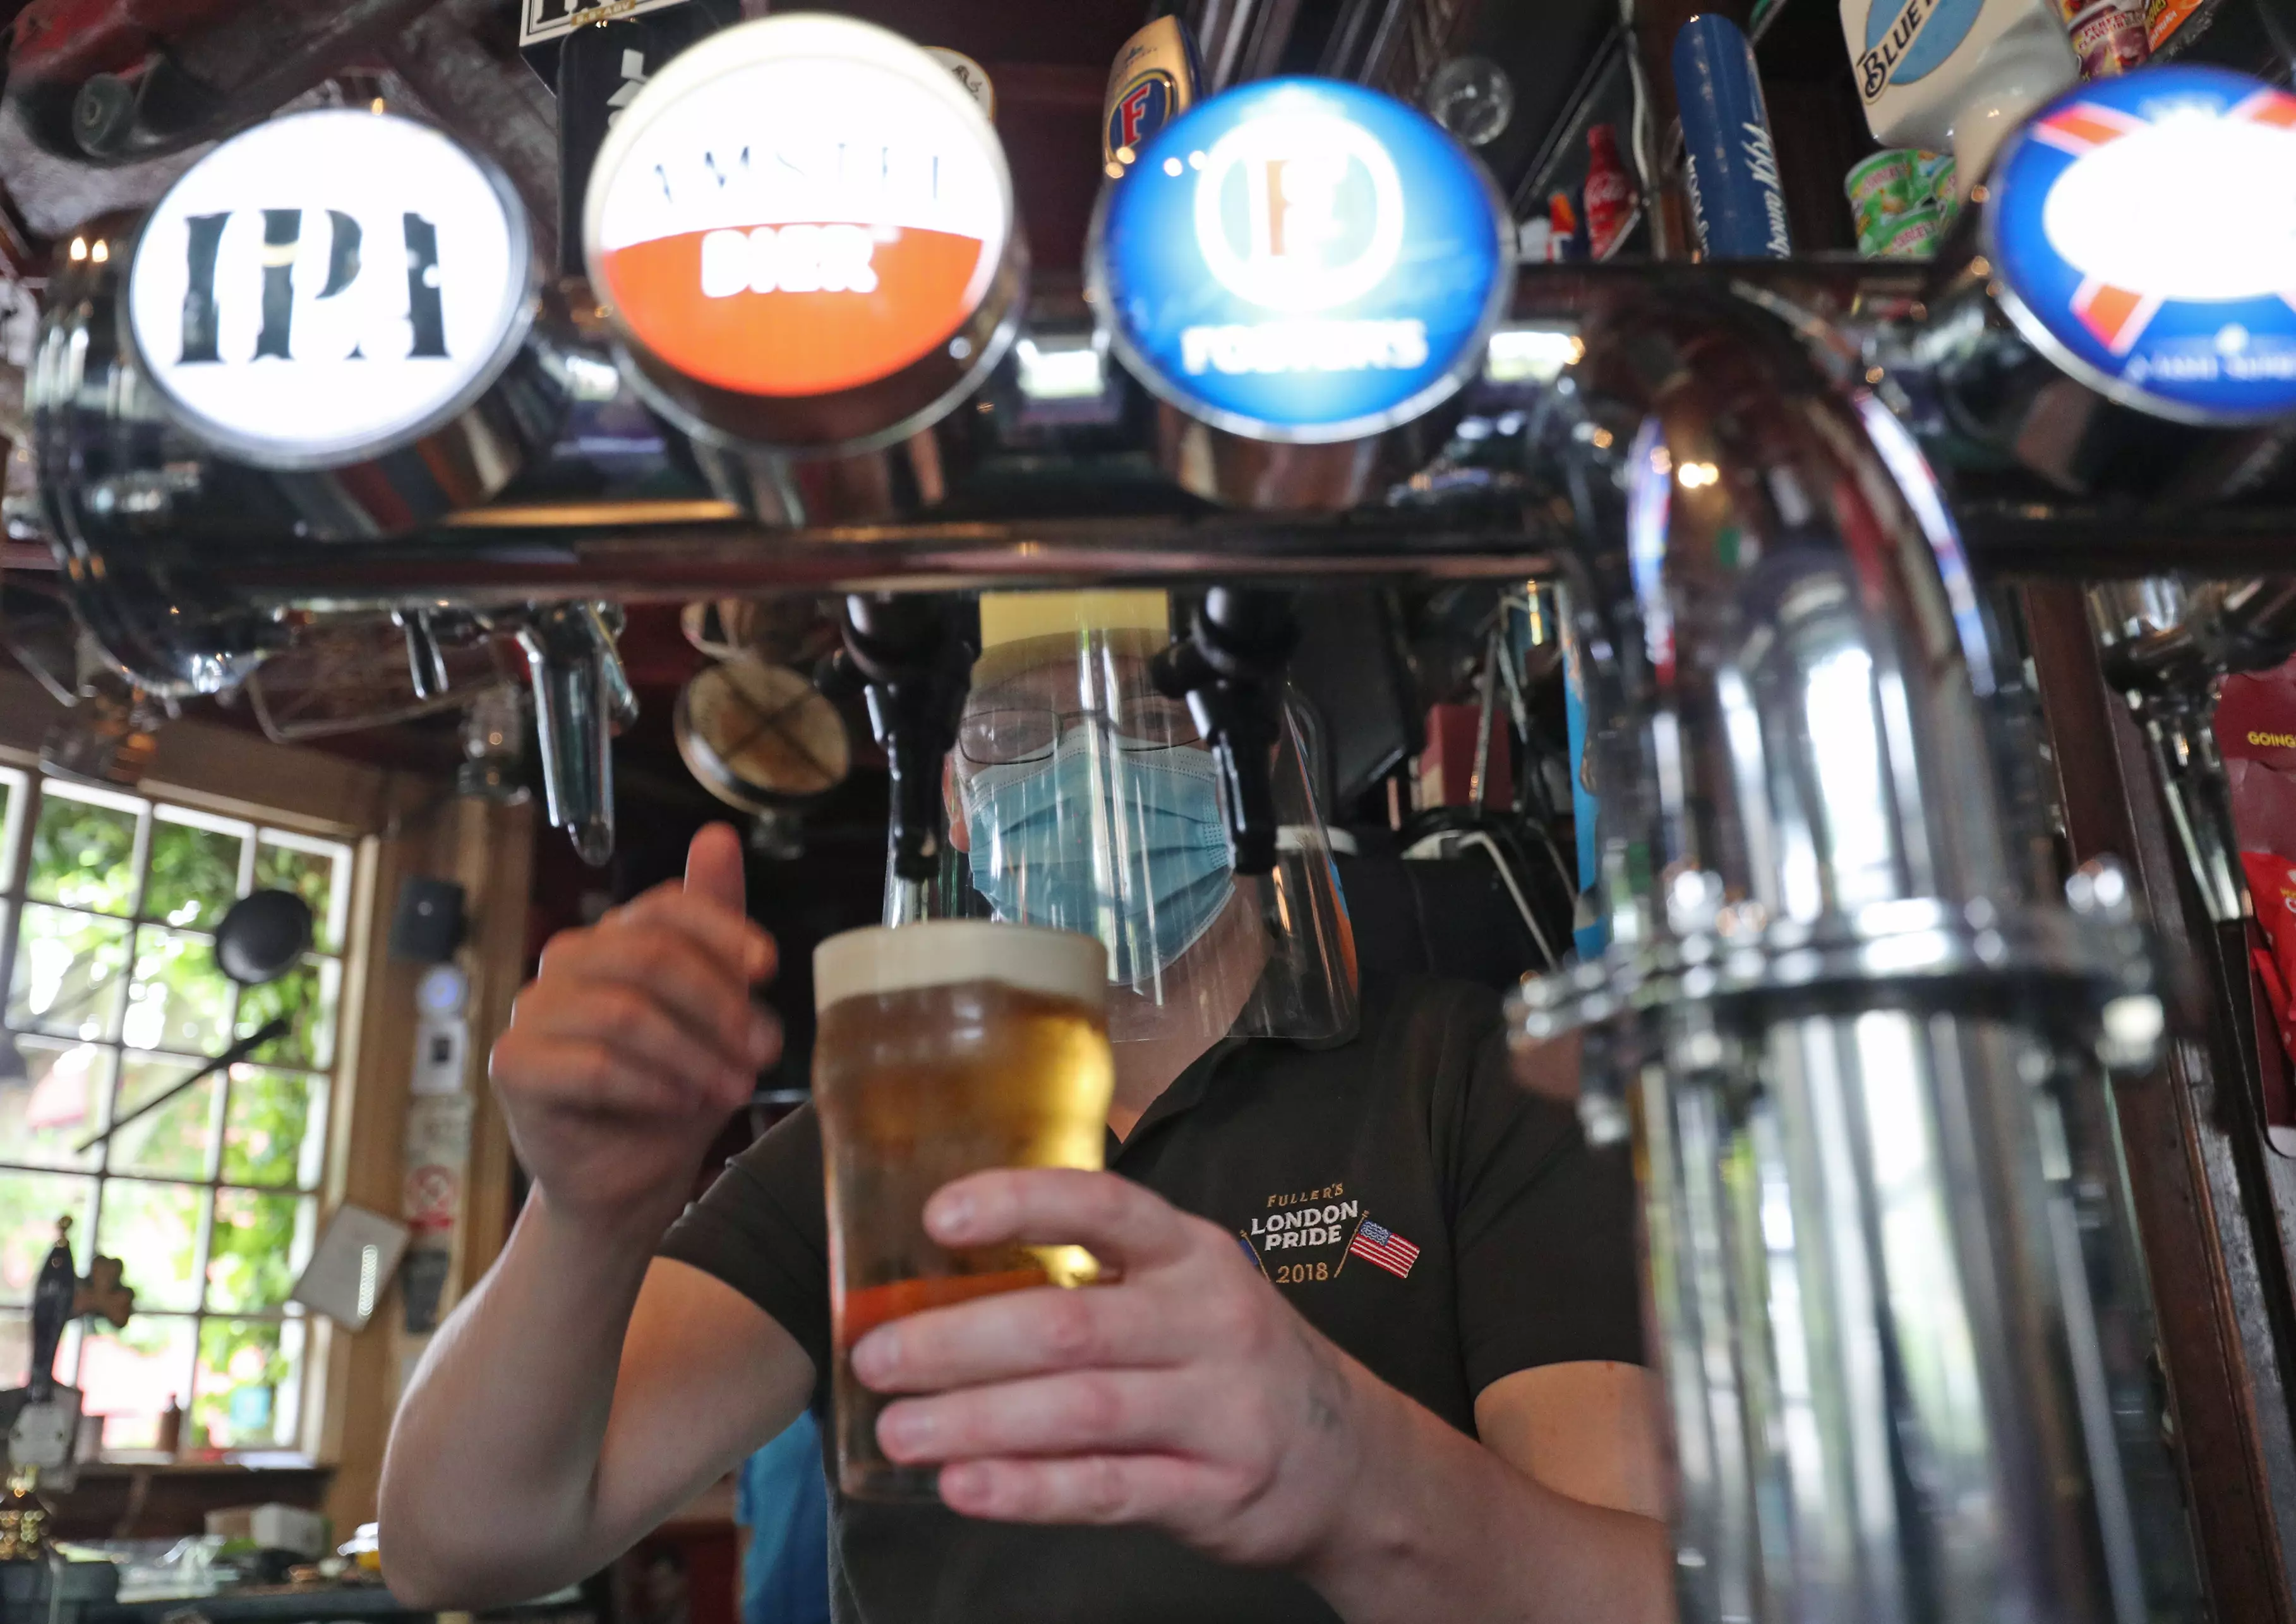 Barman Michael Fitzsimons wears PPE while pouring a pint during final preparations at The Faltering Fullback pub in North London.